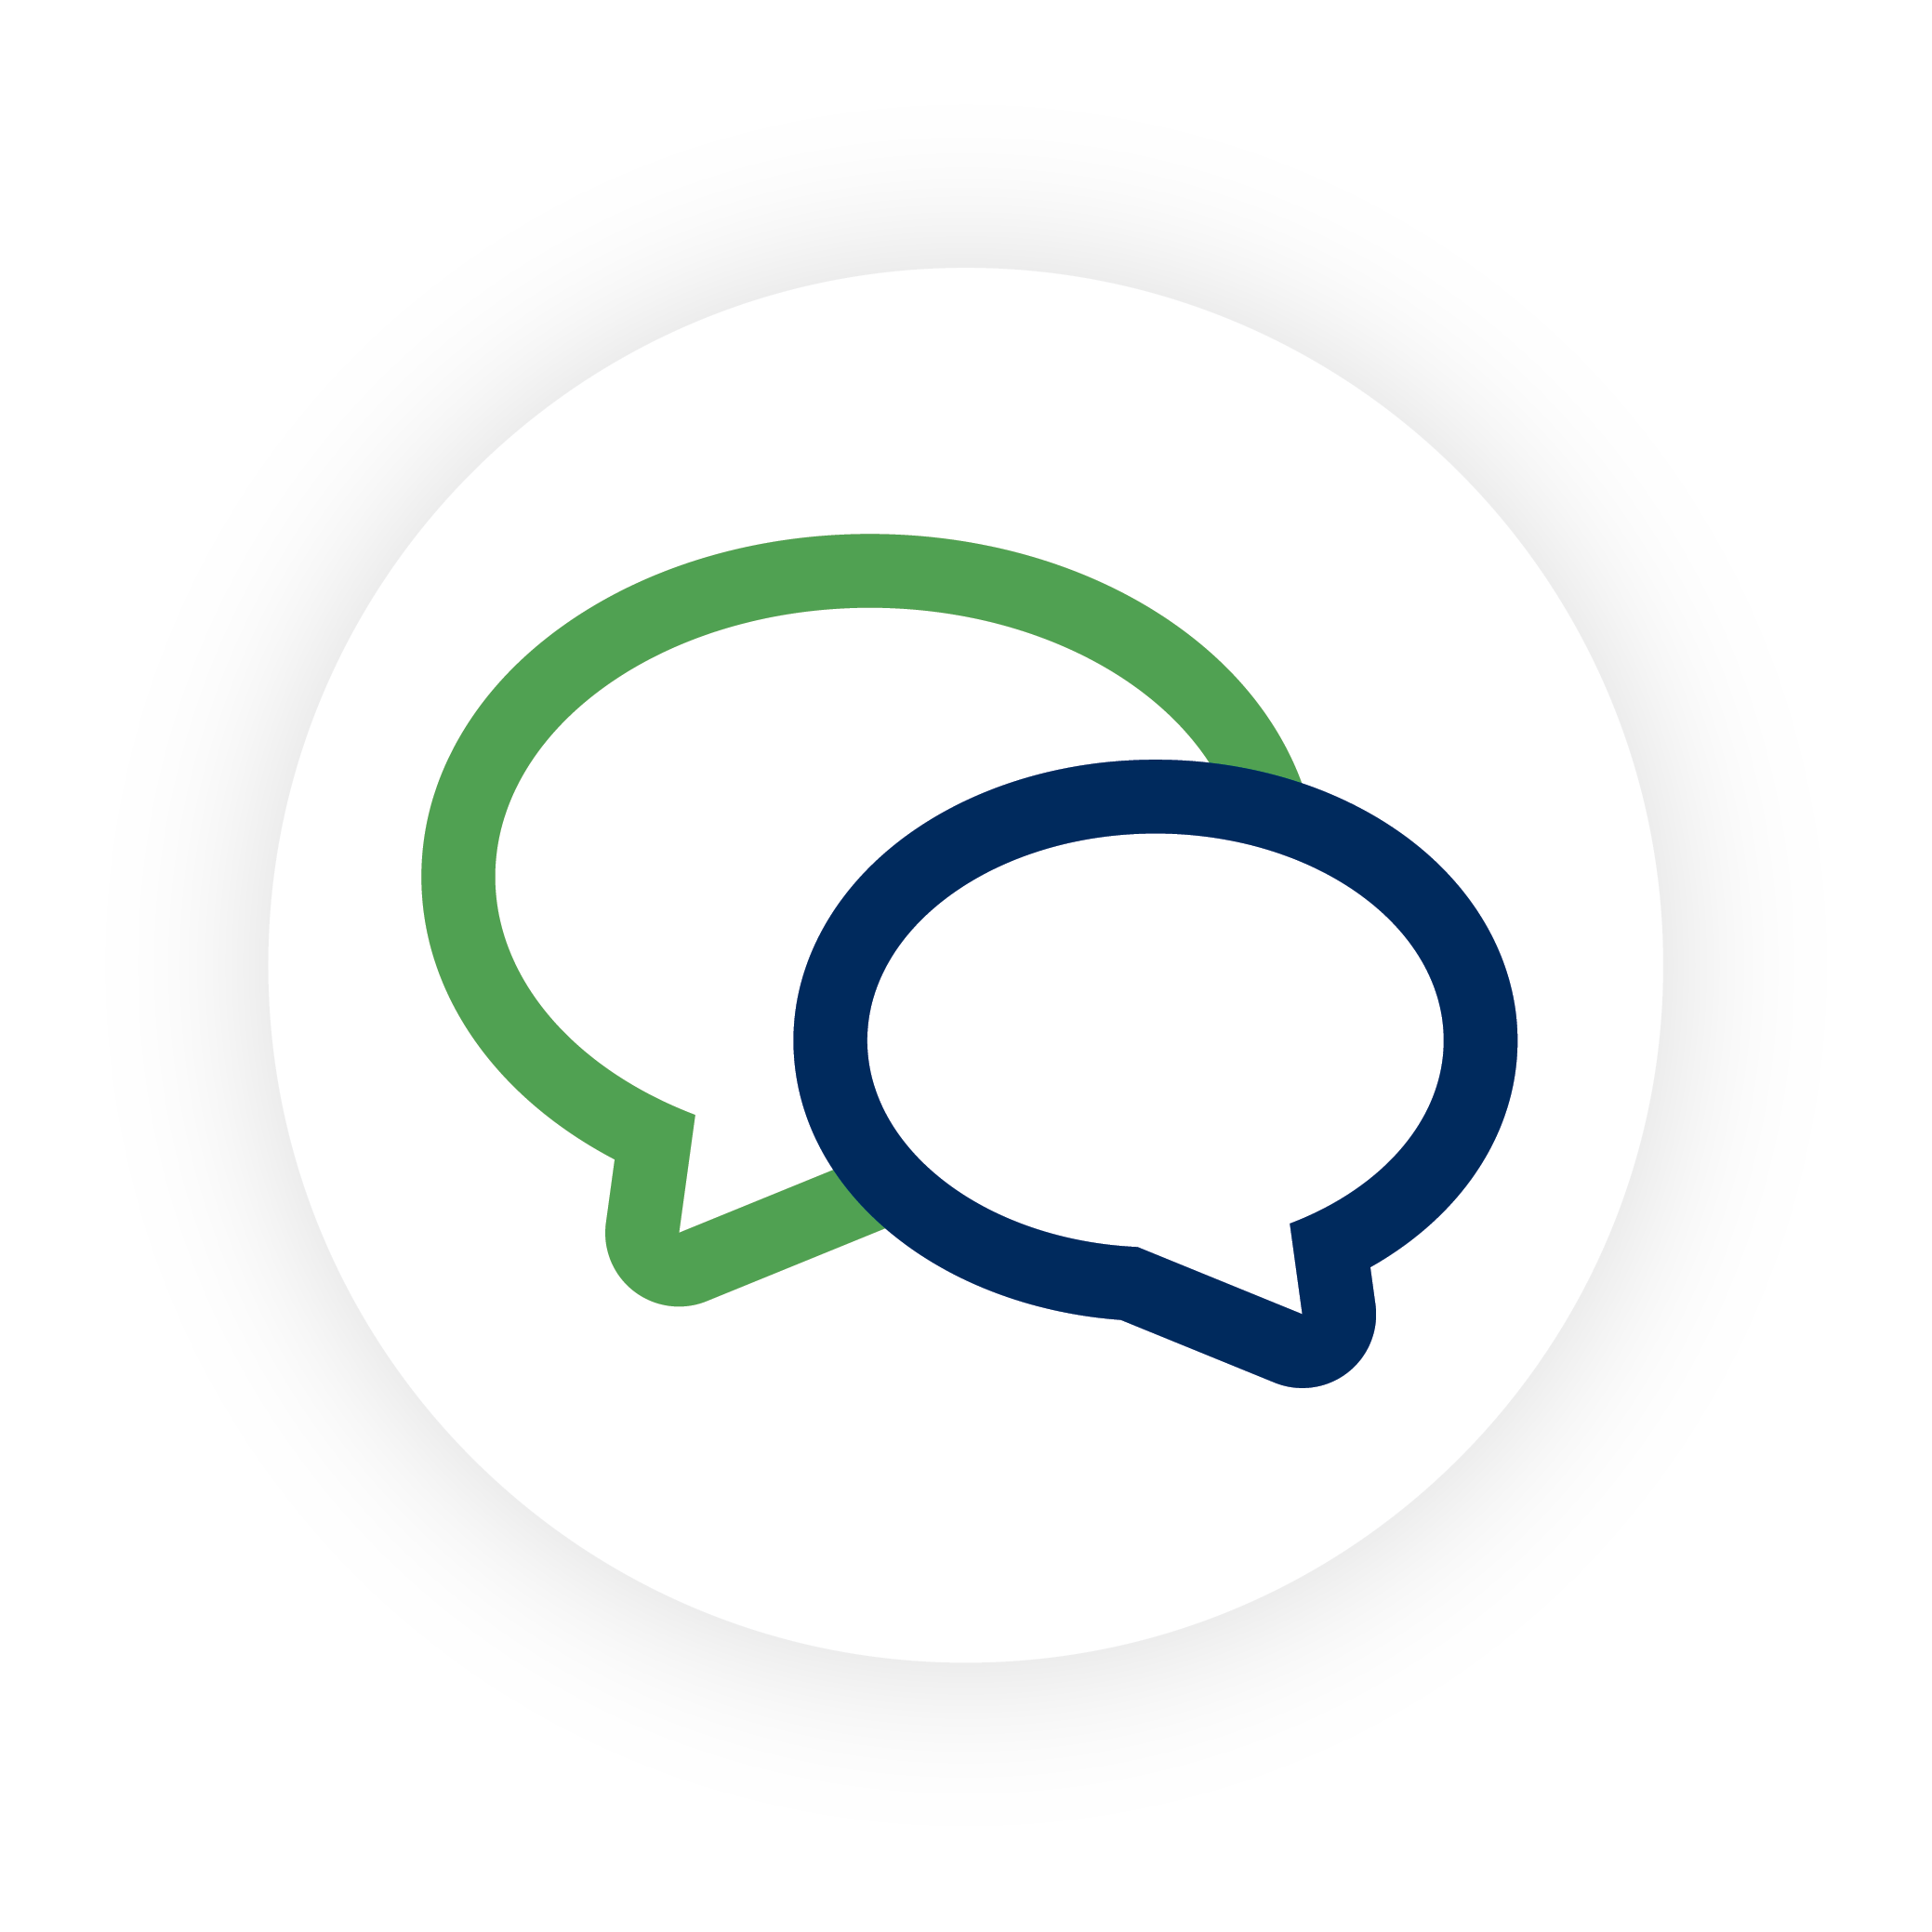 Logo featuring two overlapping speech bubbles, one green and one blue, centered within a black circle.